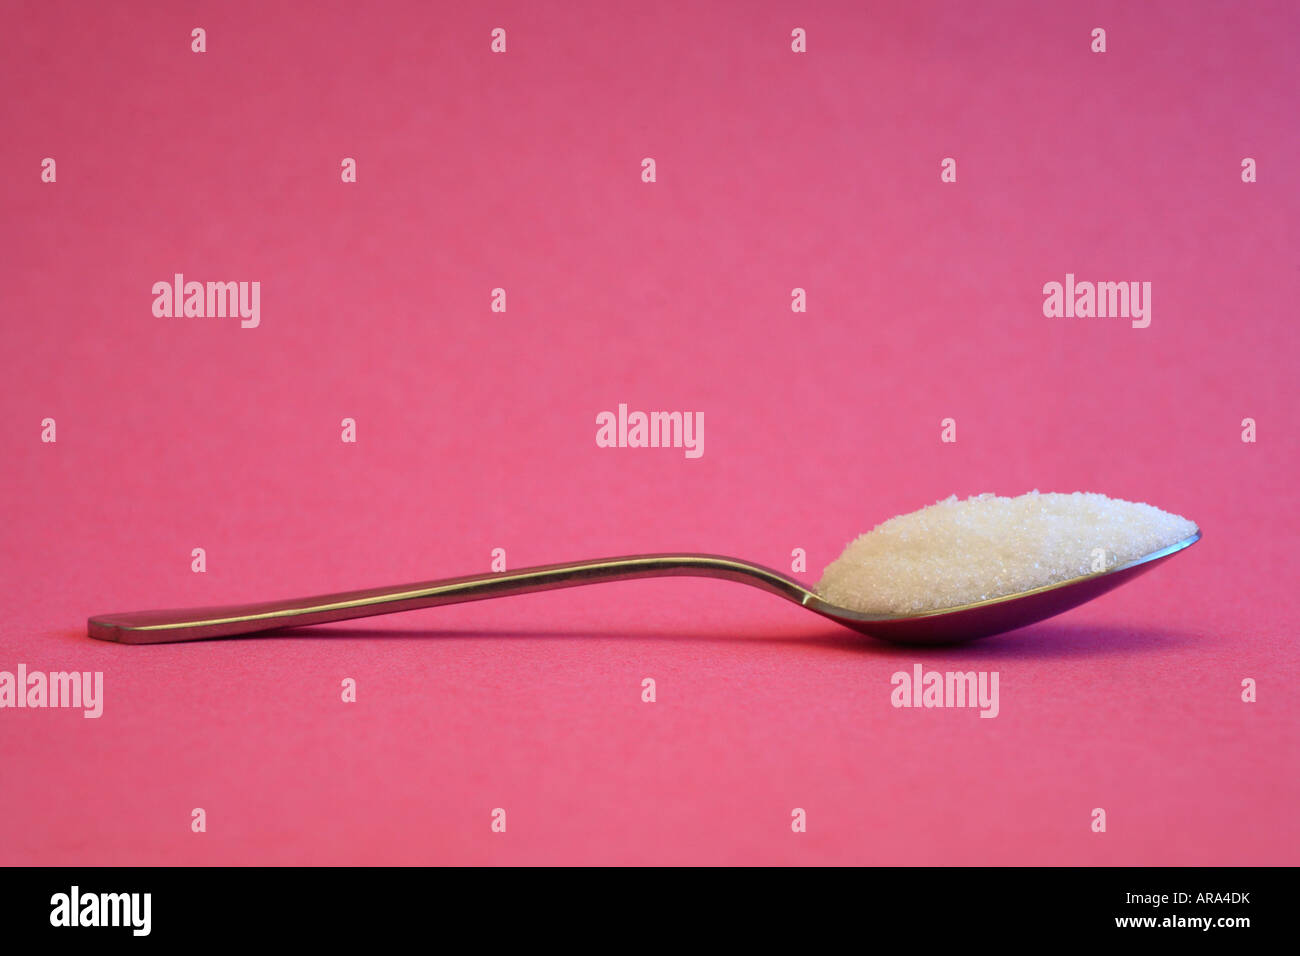 Spoonful of white sugar against a pink background. Stock Photo